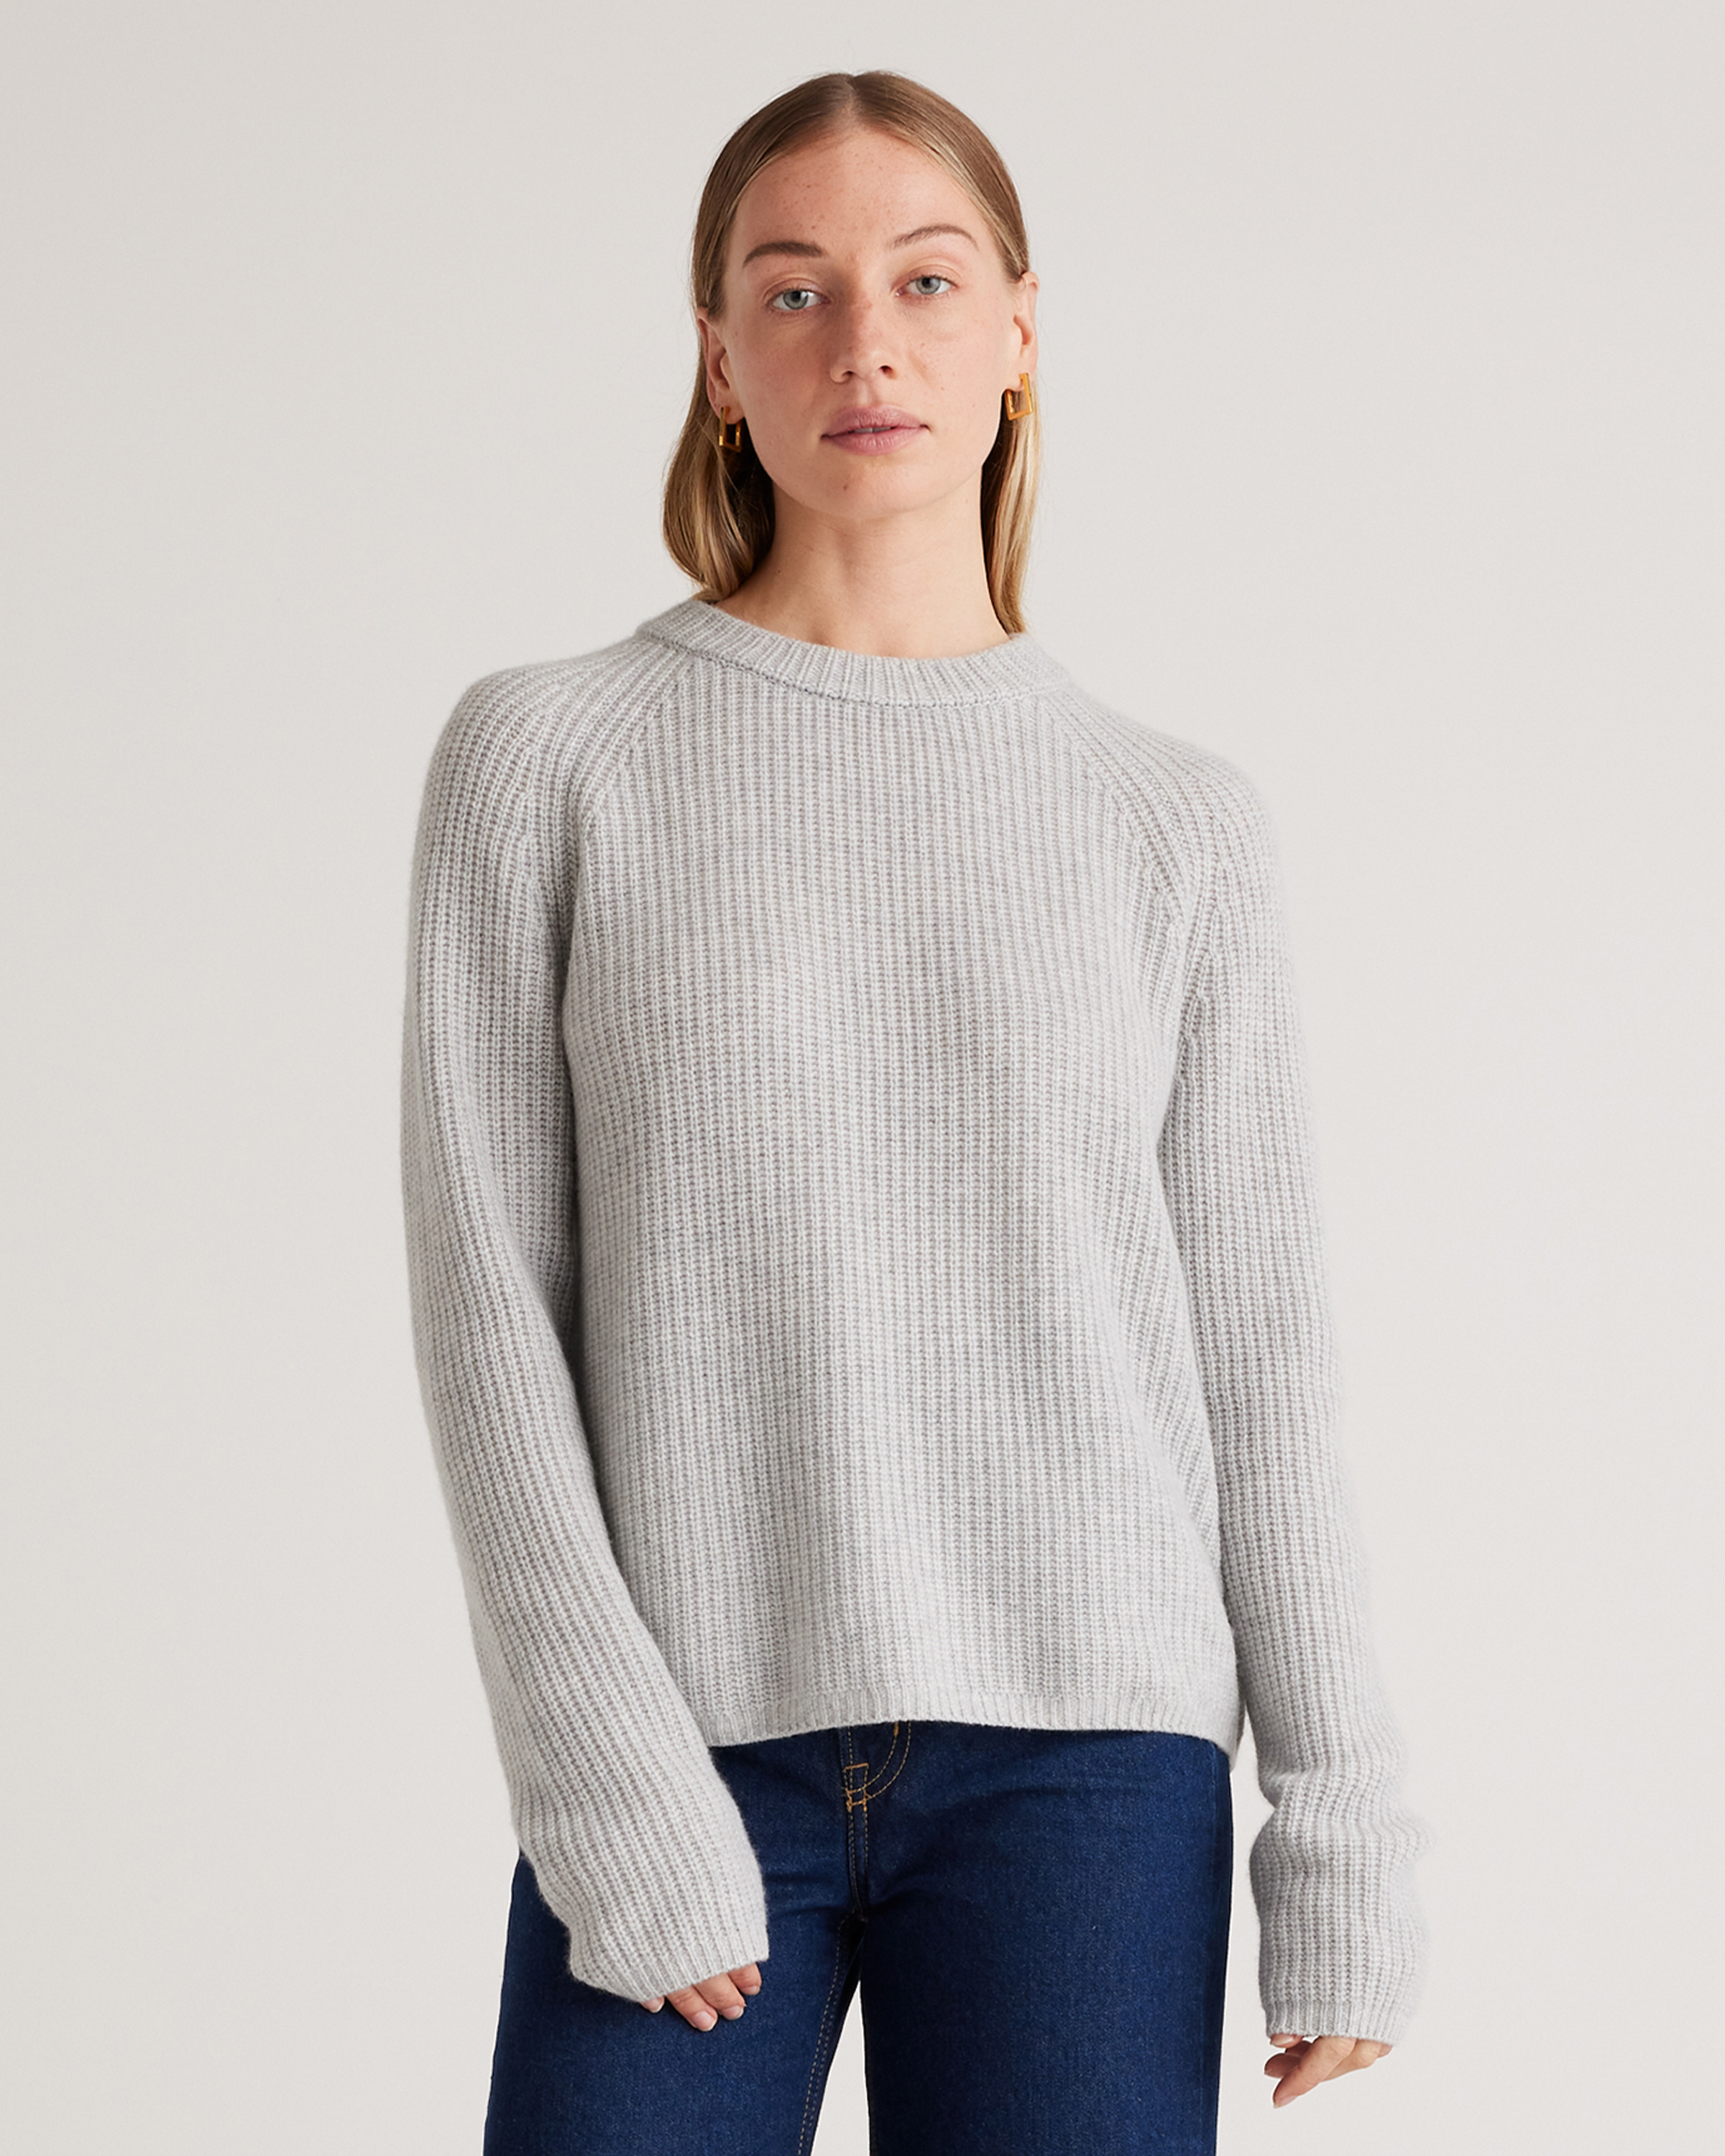 Quince Women's Mongolian Cashmere Fisherman Crewneck Knit Sweater In Heather Pale Grey